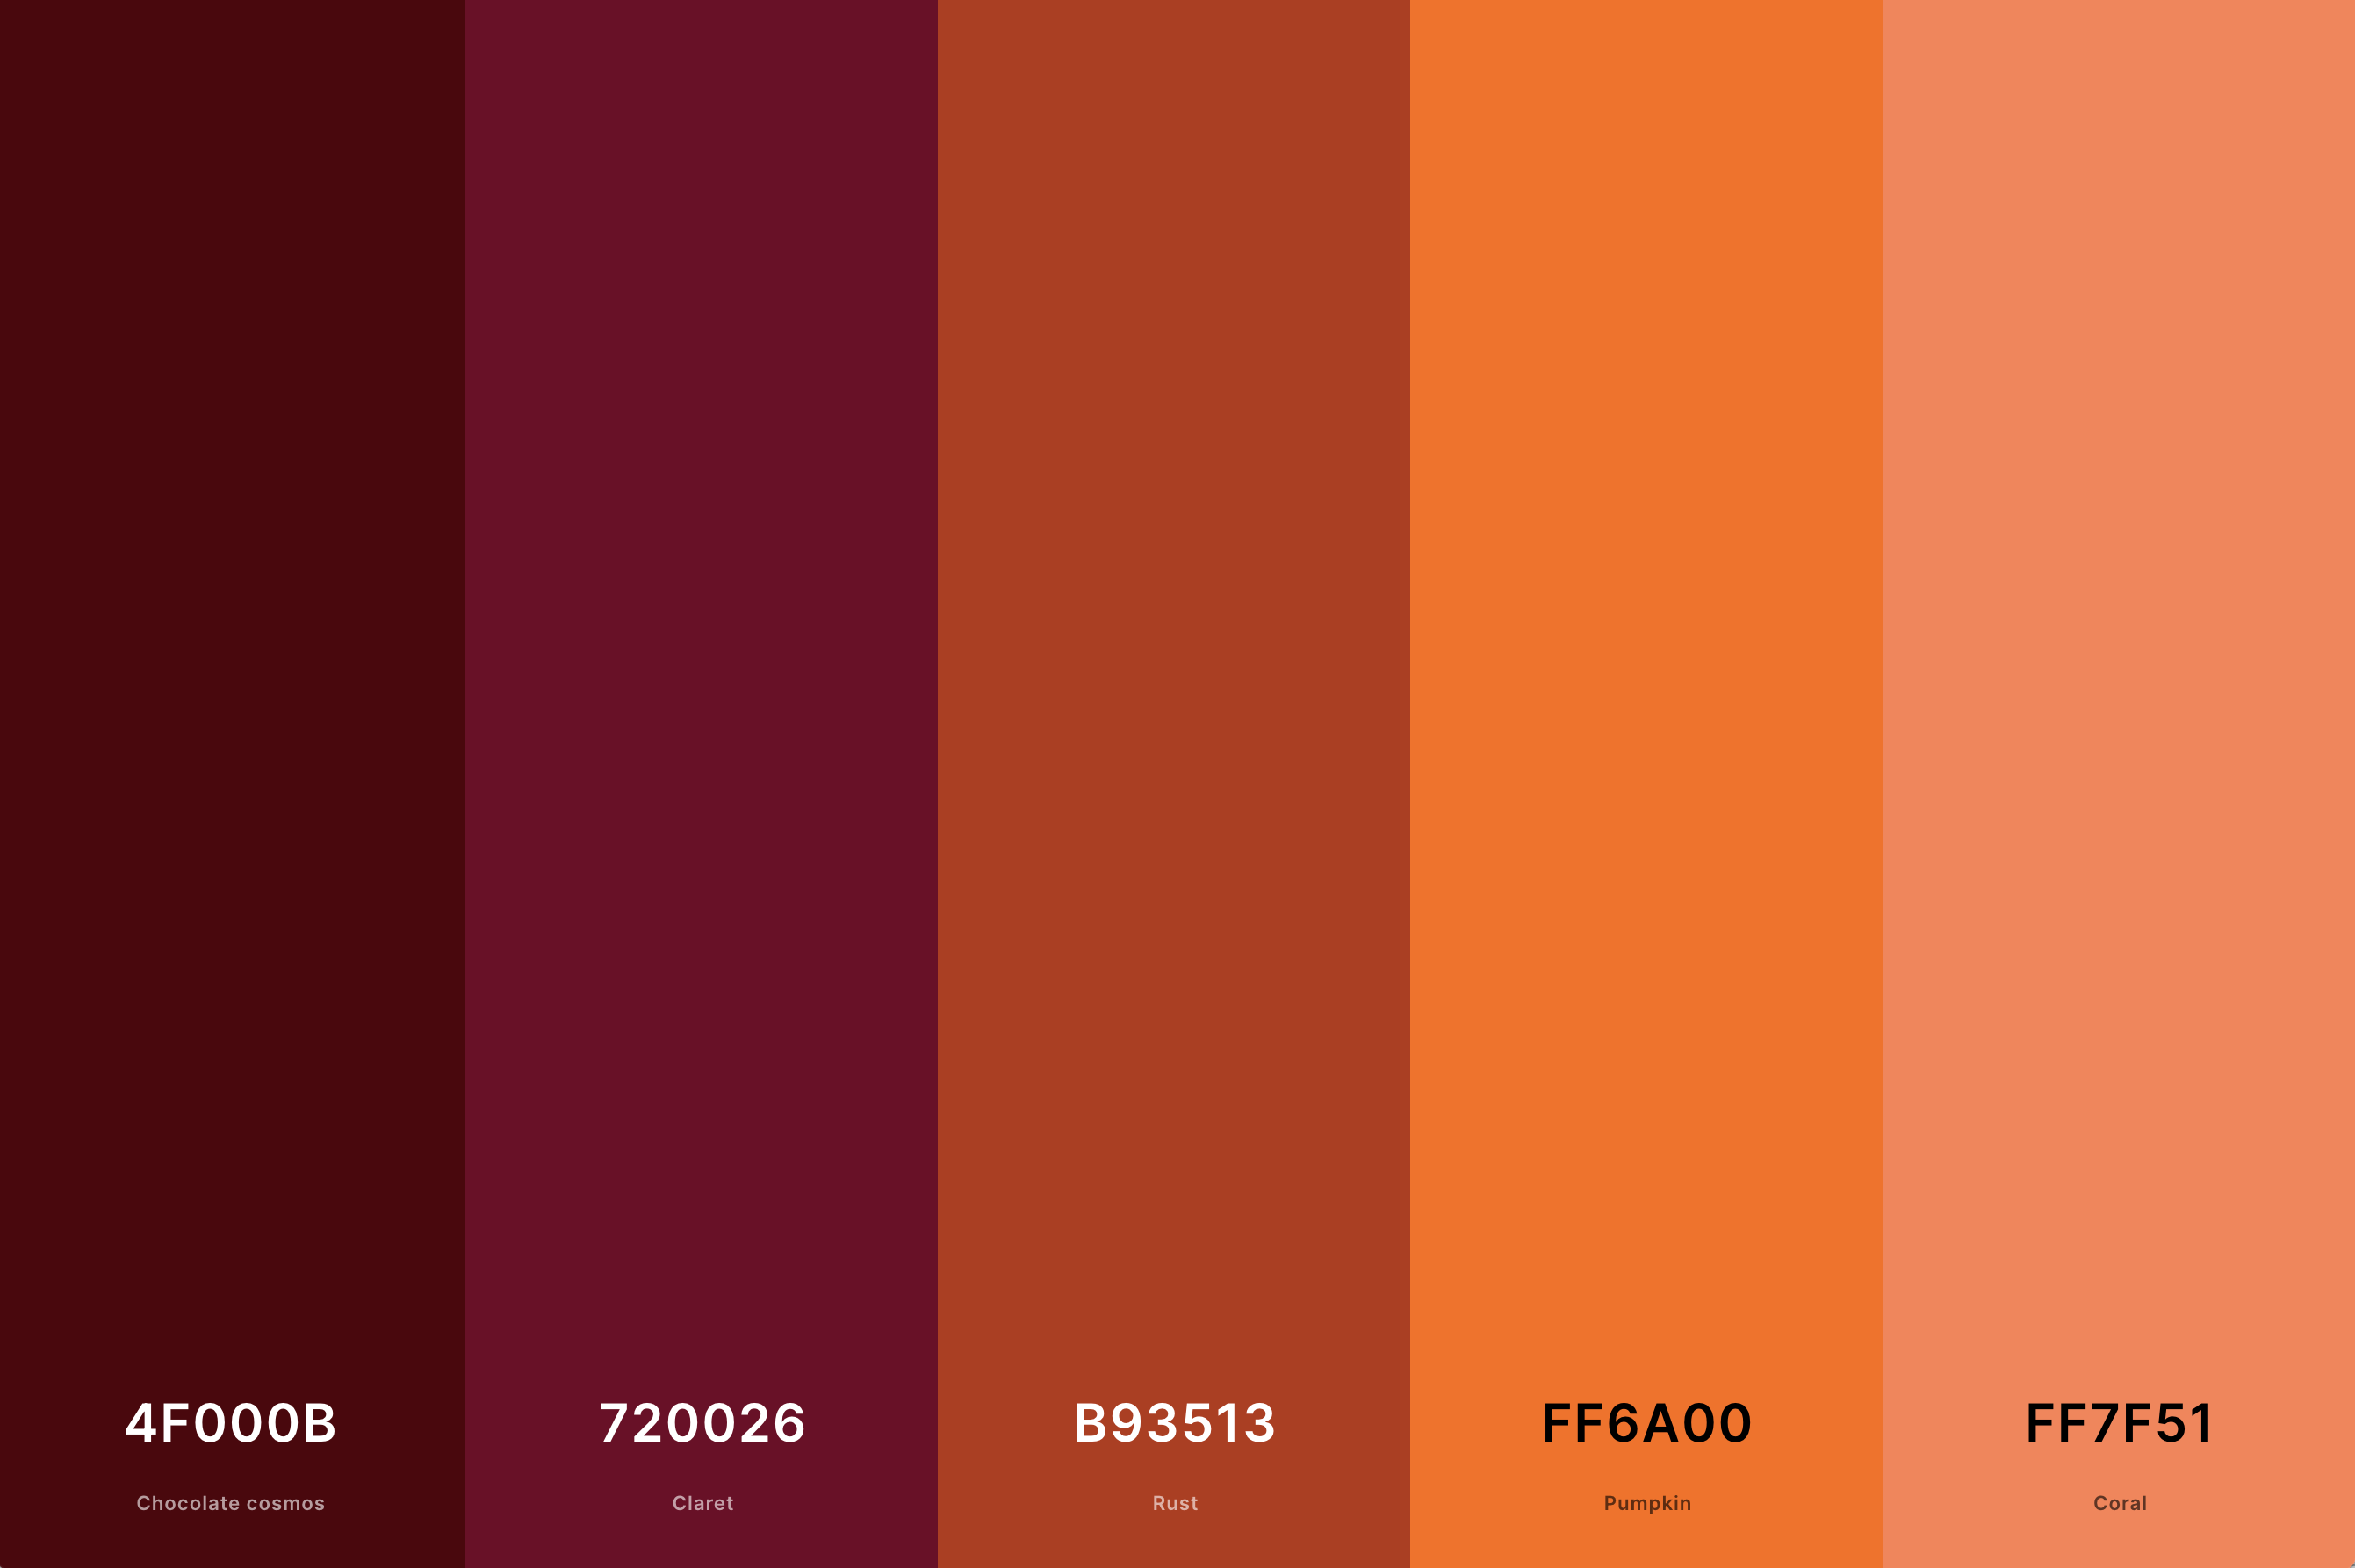 26. Orange And Burgundy Color Palette Color Palette with Chocolate Cosmos (Hex #4F000B) + Claret (Hex #720026) + Rust (Hex #B93513) + Pumpkin (Hex #FF6A00) + Coral (Hex #FF7F51) Color Palette with Hex Codes